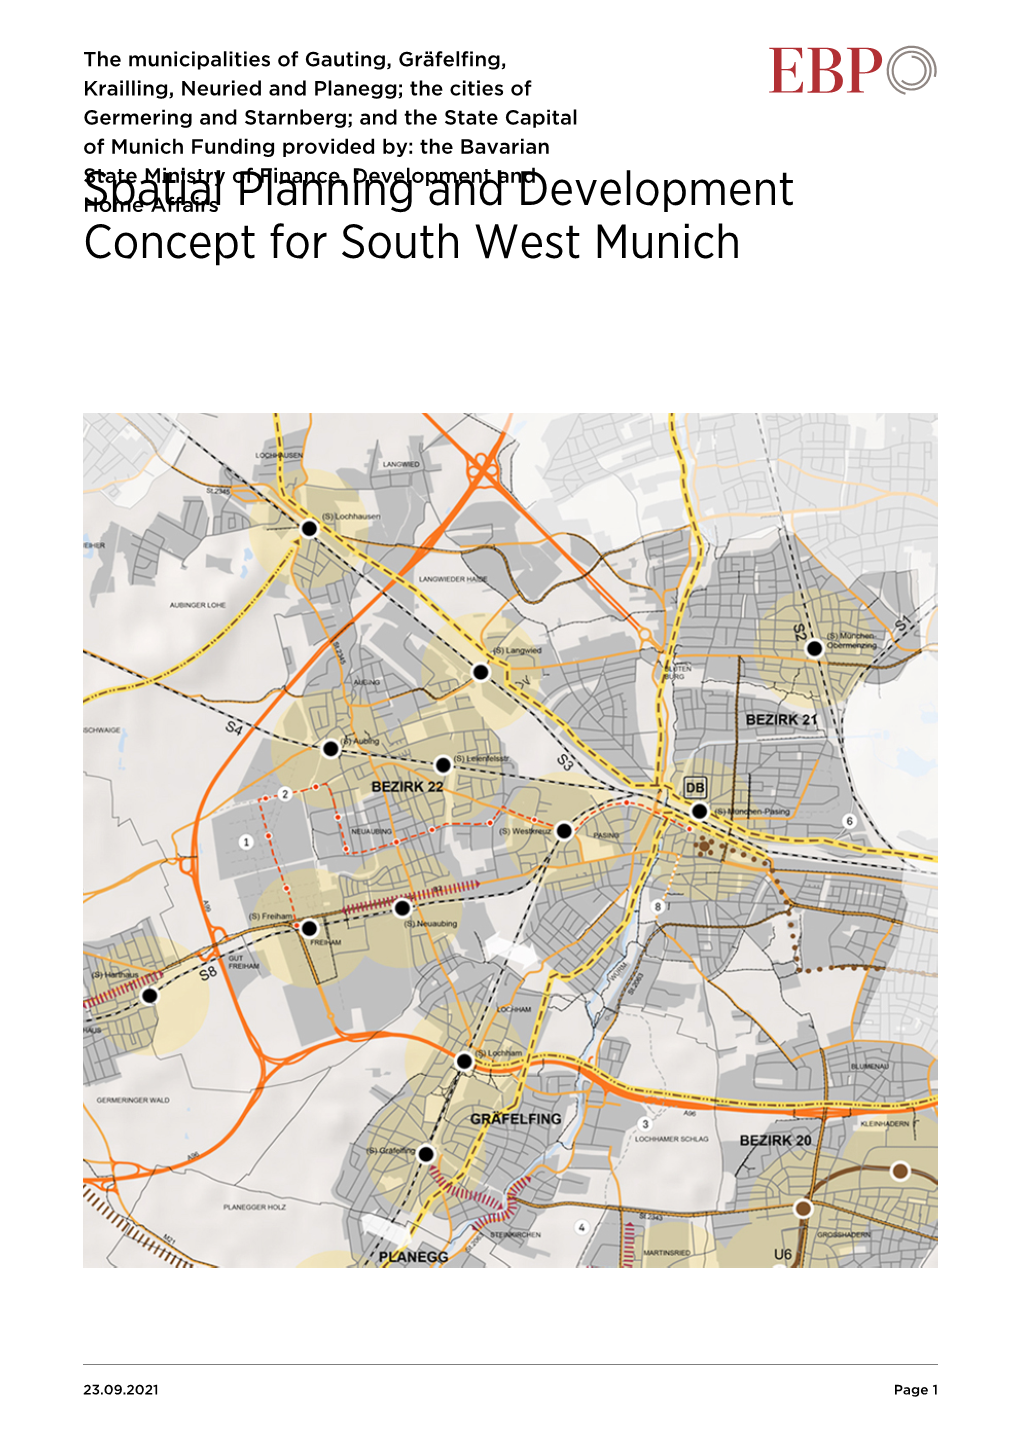 Spatial Planning and Development Concept for South West Munich